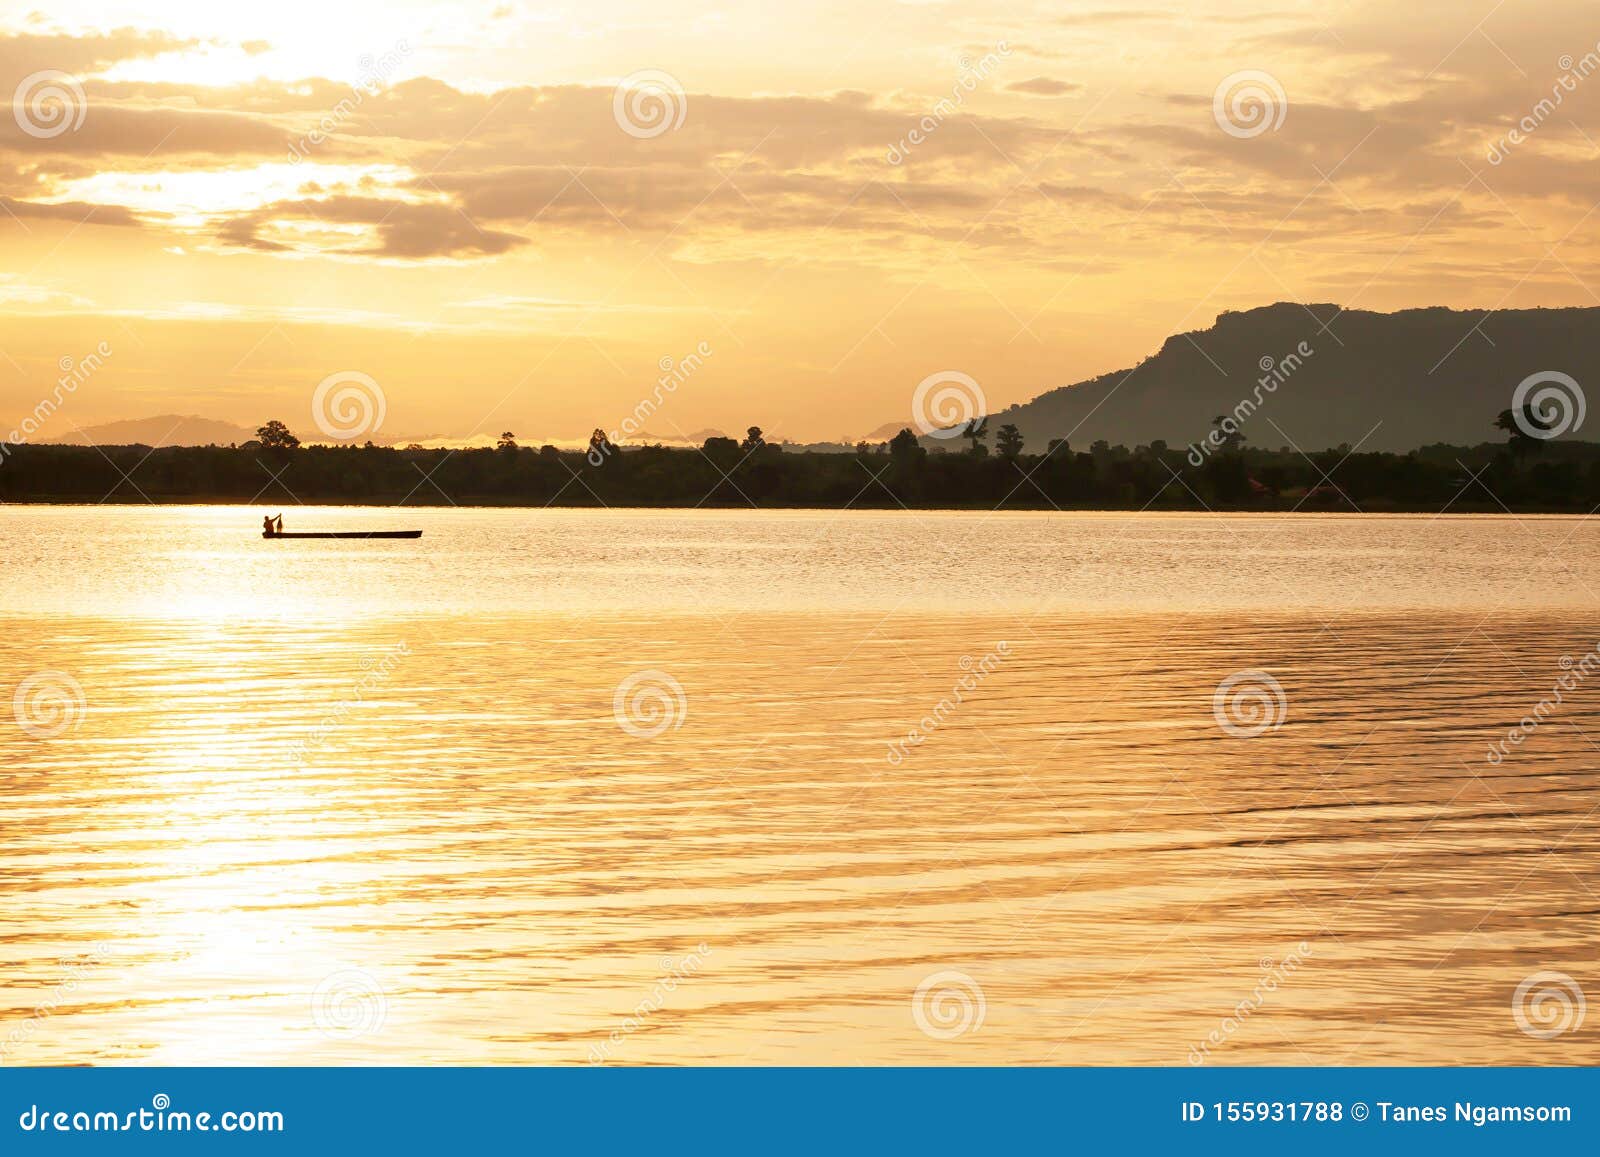 Asian Man Fishing With Nature Background, Lifestyle Concept. Stock Photo,  Picture and Royalty Free Image. Image 129905194.